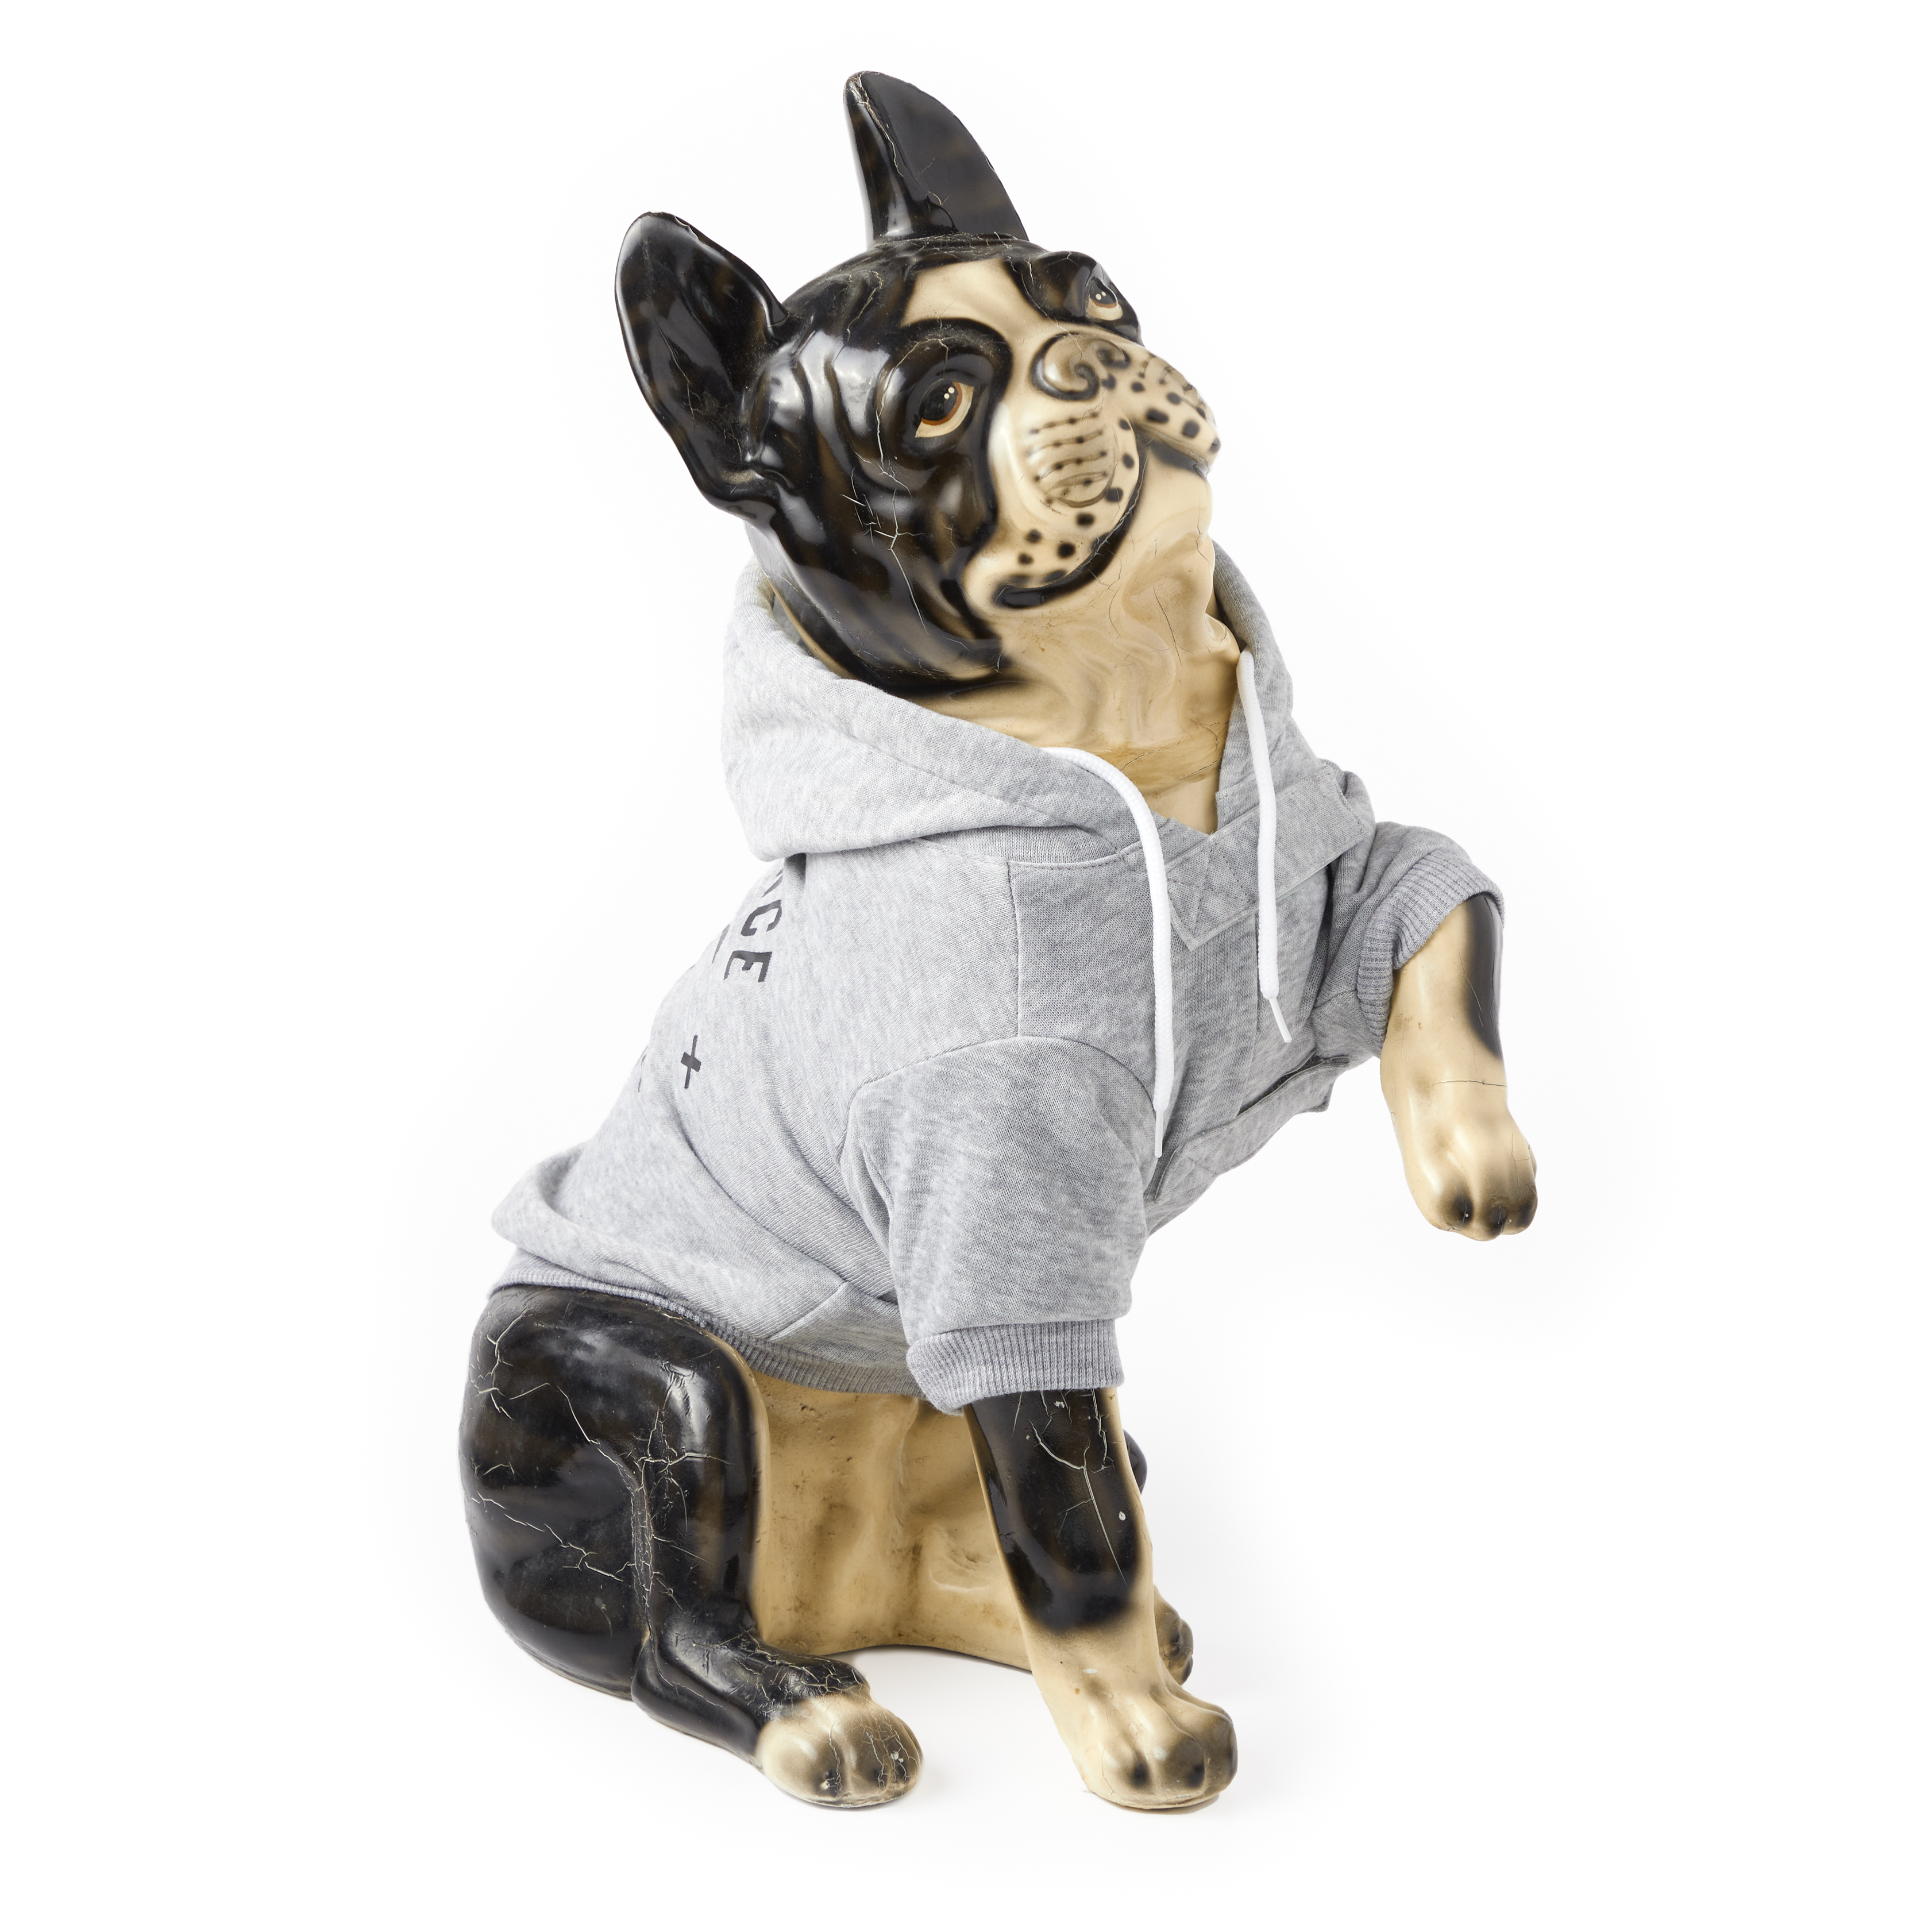 Obedience School Dropout Dog Hoodie - XS